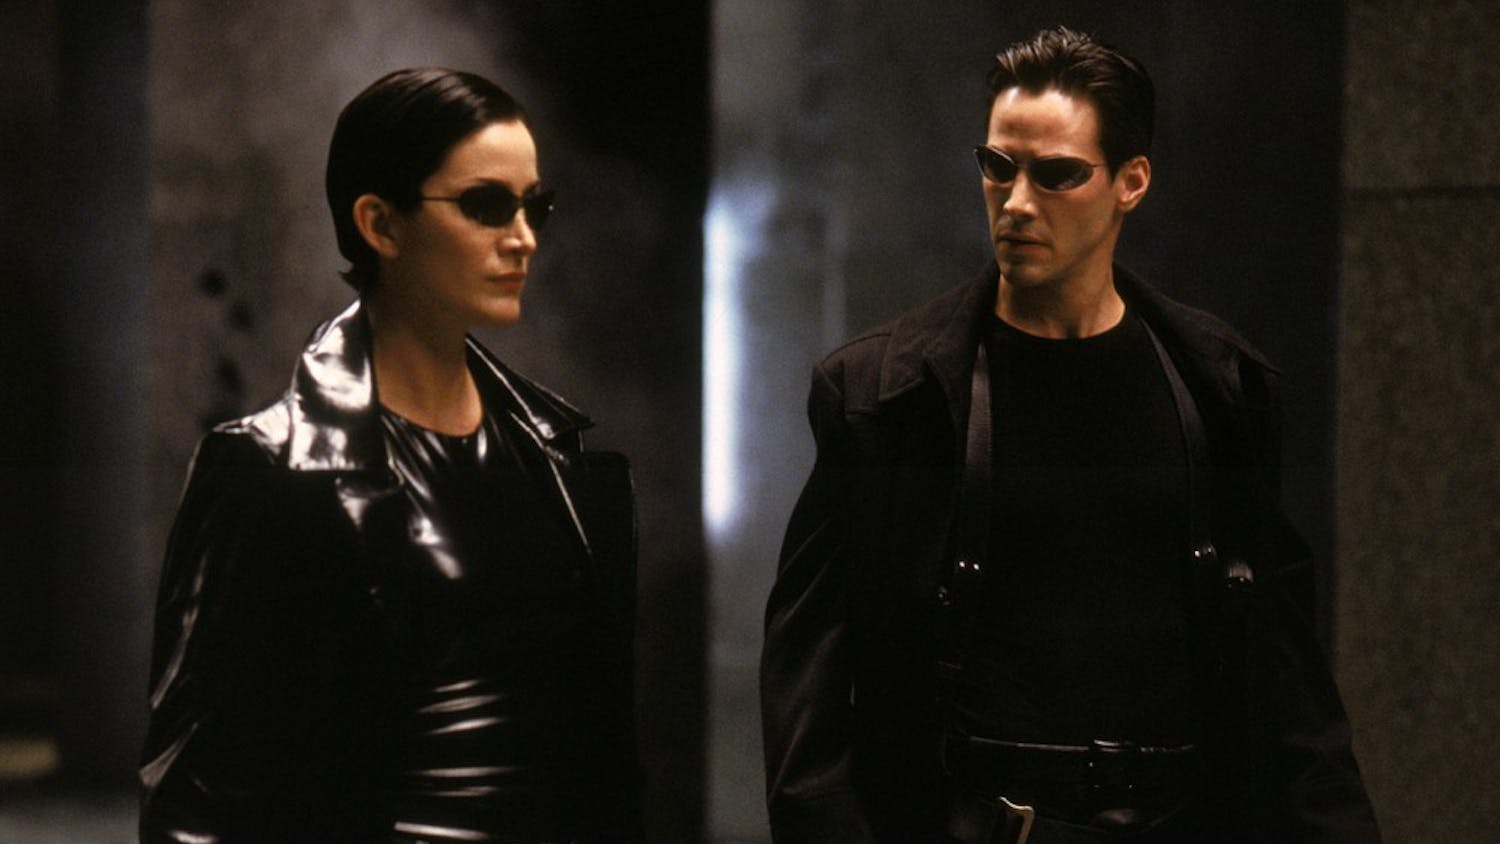 Carrie-Anne Moss and Keanu Reeves star in "The Matrix."